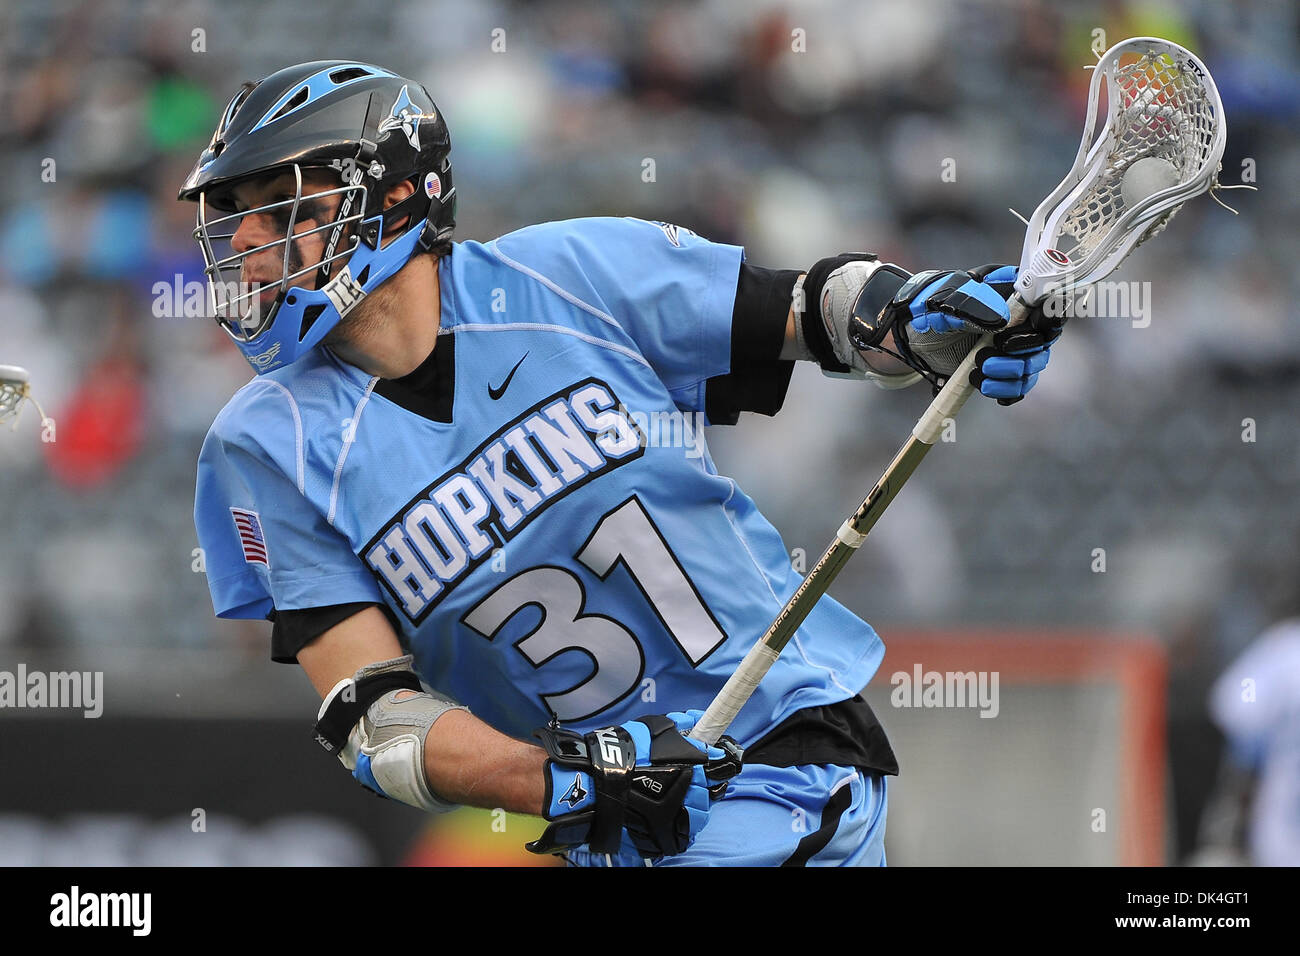 Apr. 3, 2011 - East Rutherford, New Jersey, U.S - Johns Hopkins Blue Jays Midfielder John Ranagan (31) in action during the Konica Minolta Big City Classic at The New Meadowlands Stadium in East Rutherford New Jersey Johns Hopkins defeats UNC 10 to 9 (Credit Image: © Brooks Von Arx/Southcreek Global/ZUMAPRESS.com) Stock Photo